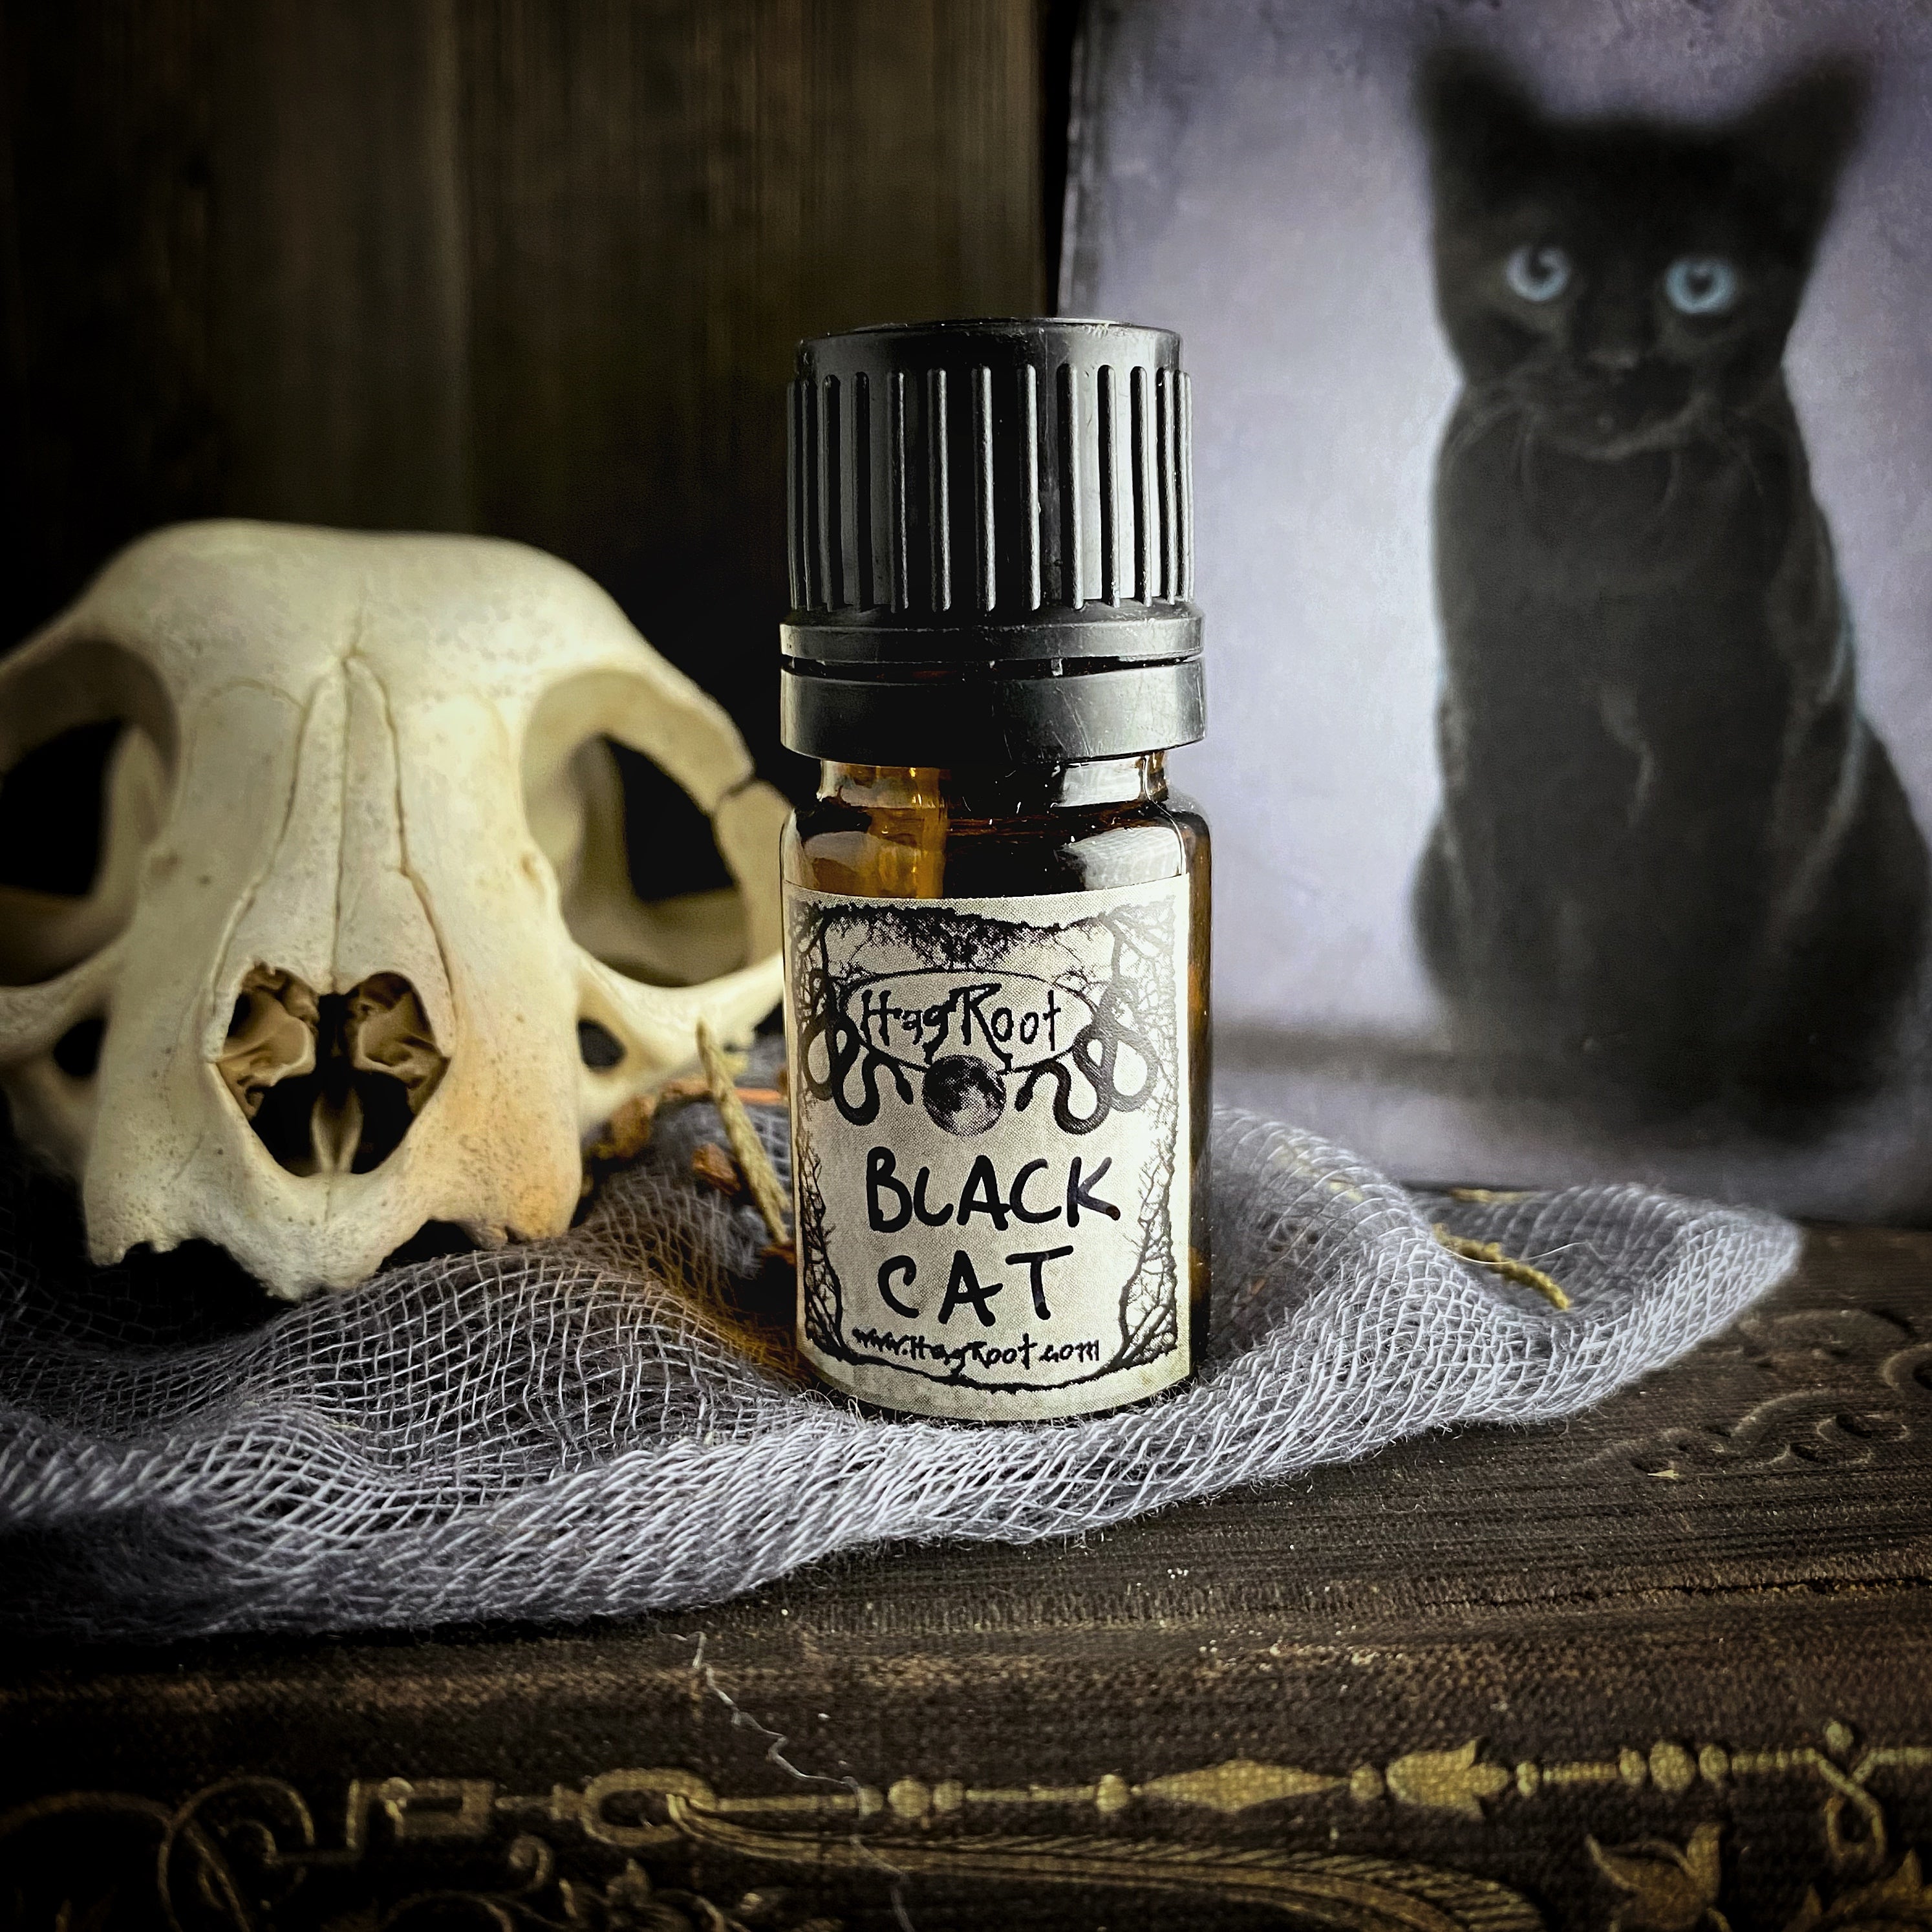 BLACK CAT-(Black Leather, Black Tea Leaves, Dark Patchouli, Smoked Woods)-2021 Edition-Perfume, Cologne, Anointing, Ritual Oil